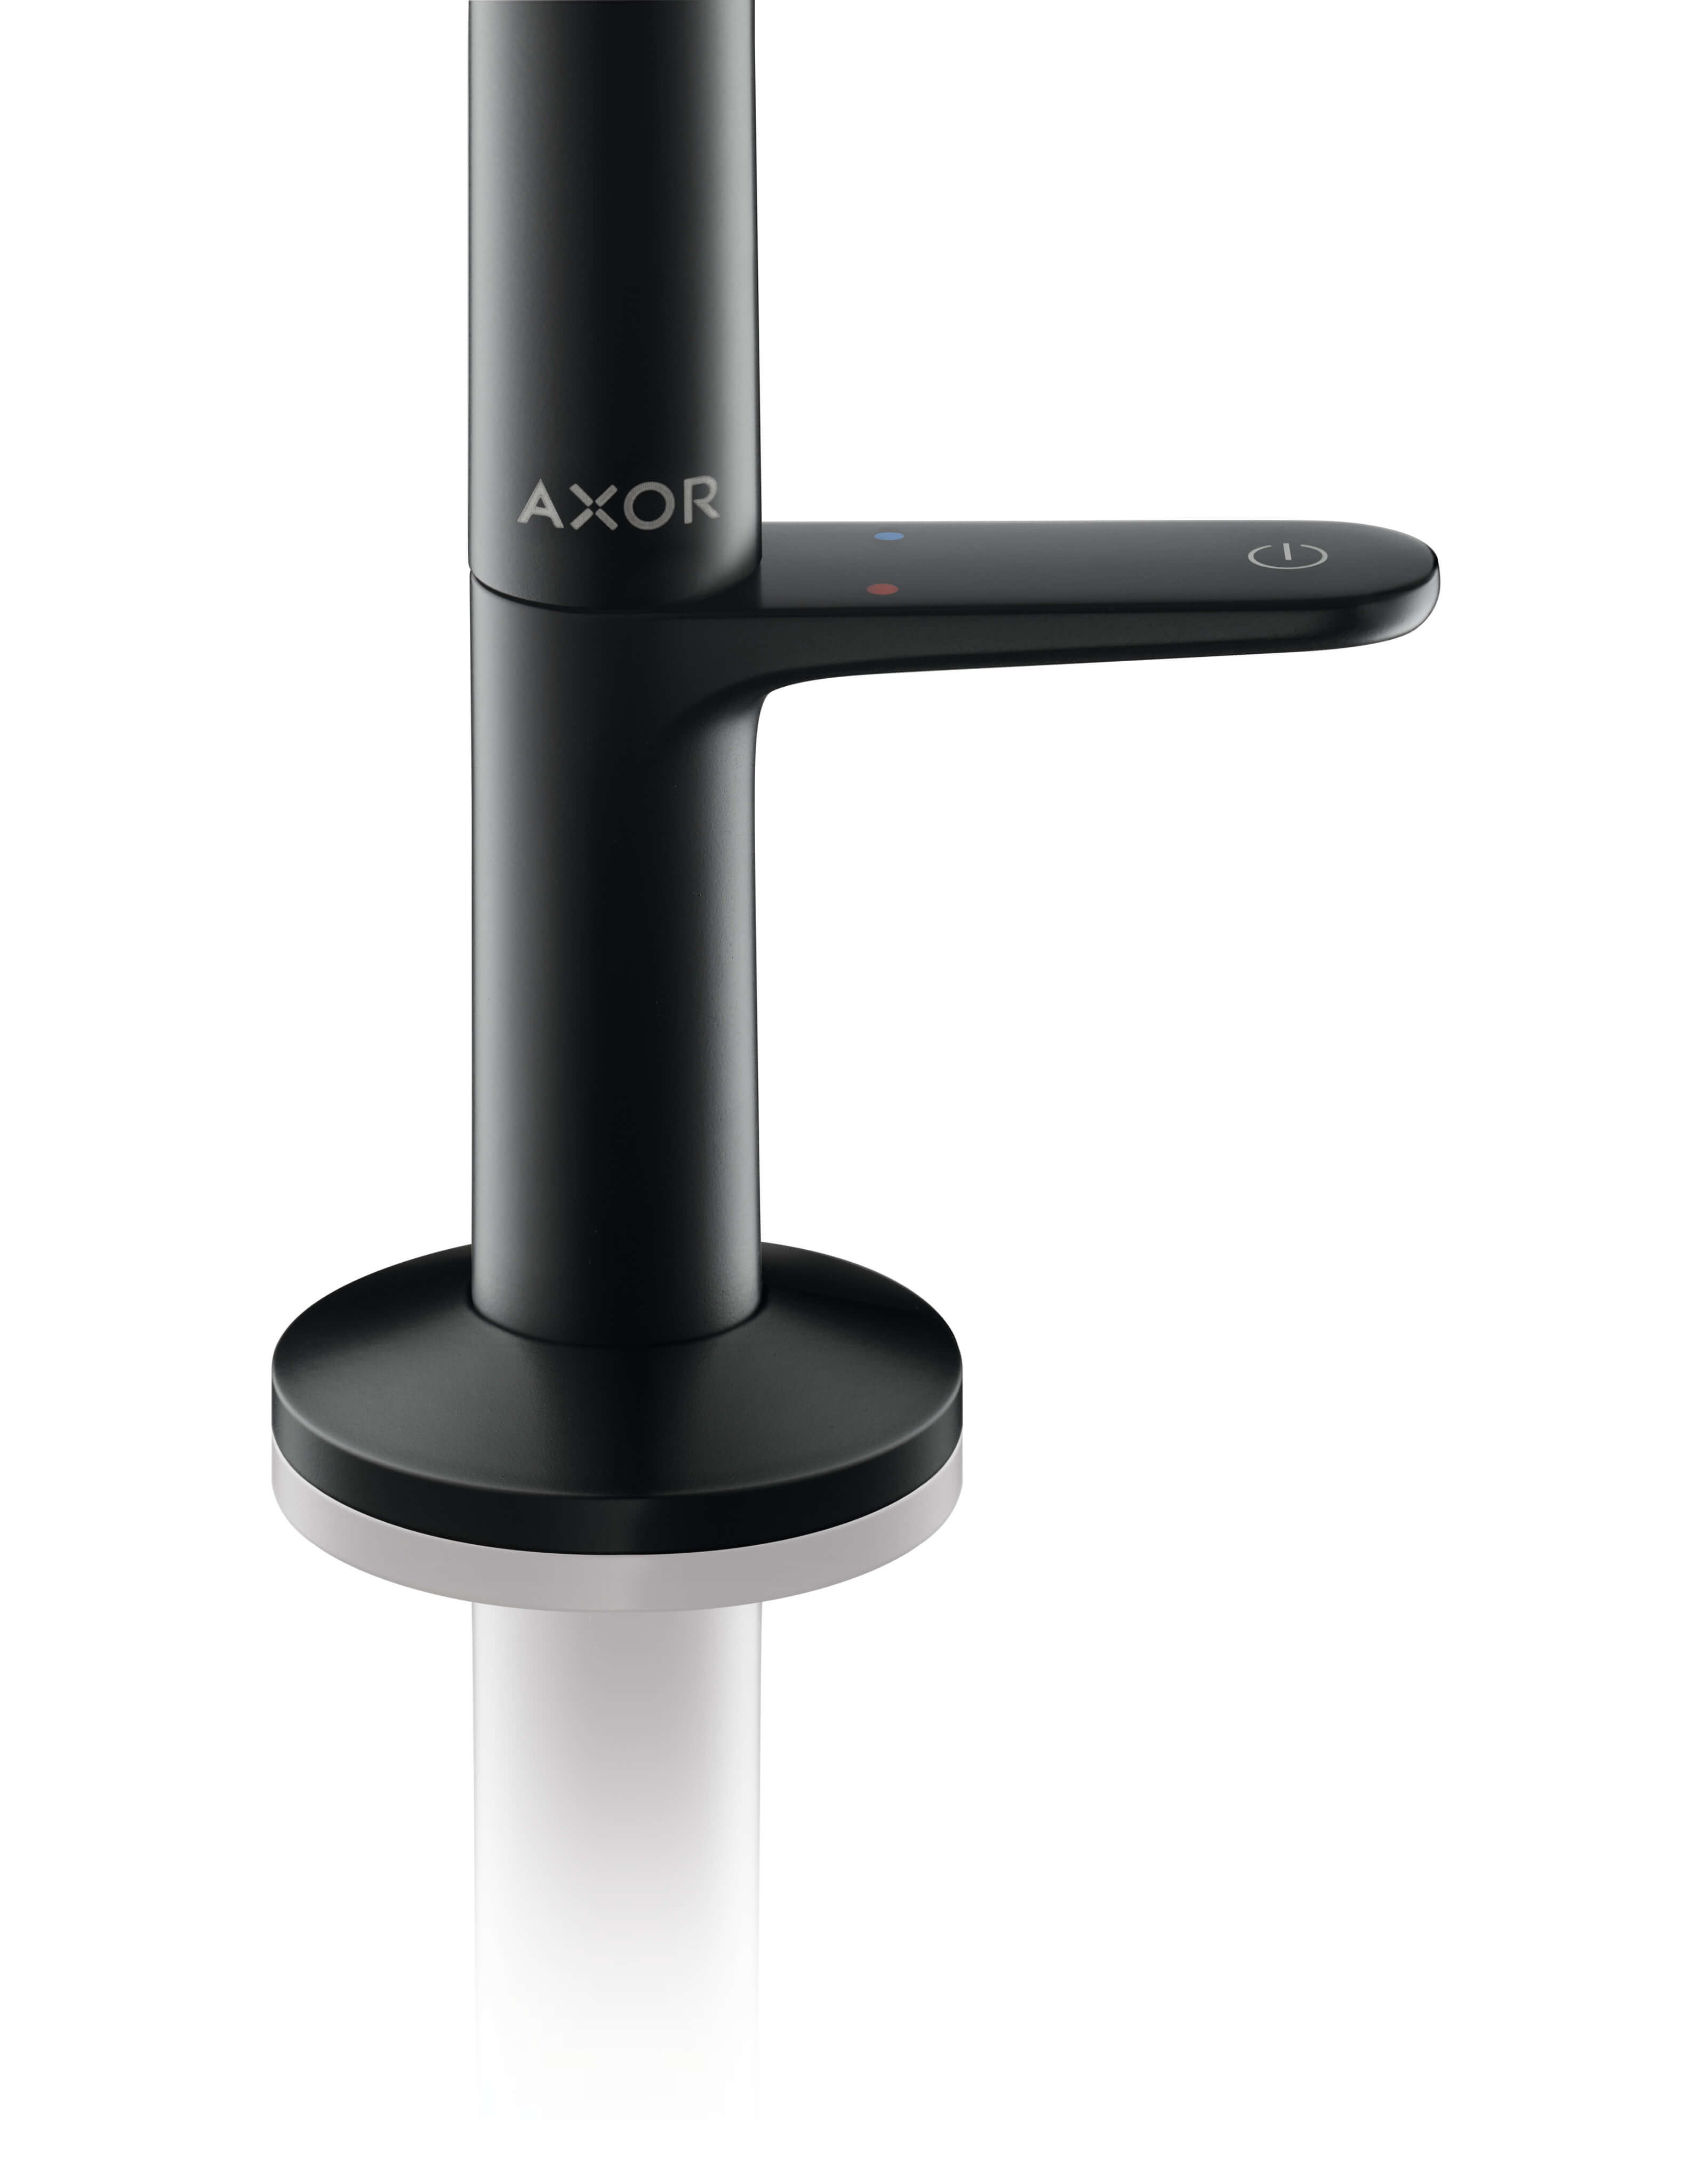 aad00933 - The essence of exquisite simplicity reimagined for AXOR One